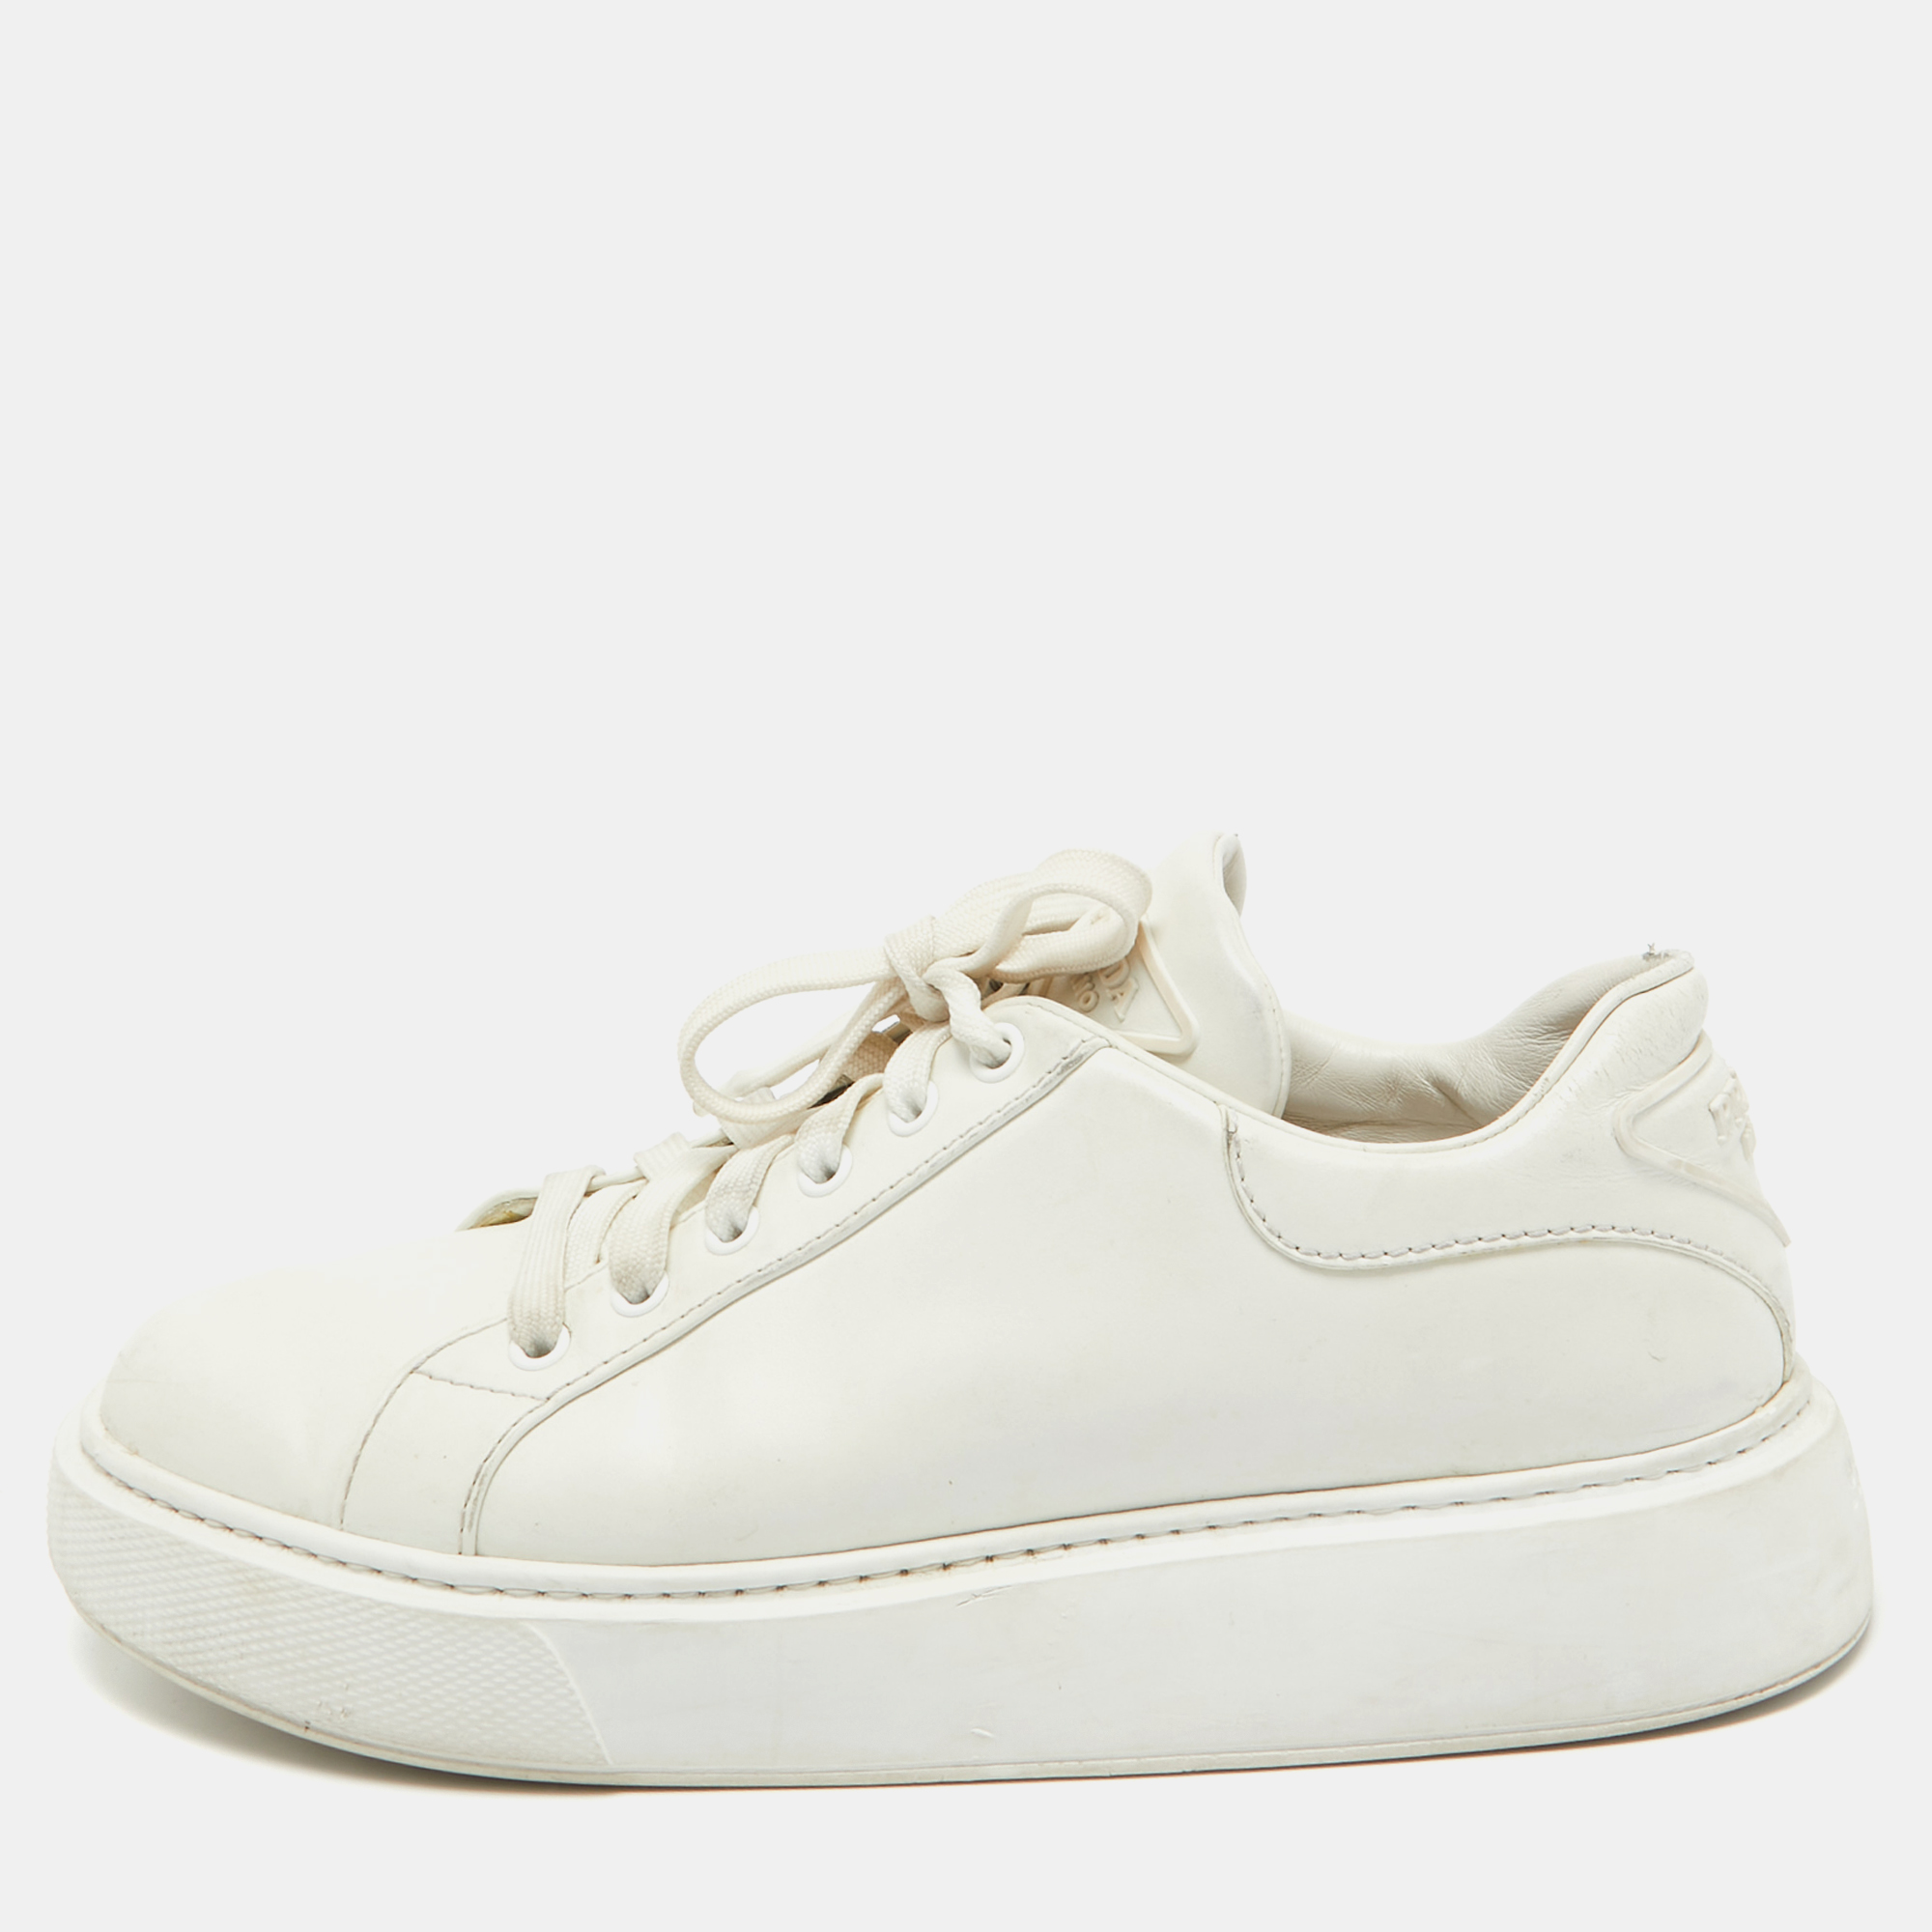 Pre-owned Prada White Leather Low Top Sneakers Size 39